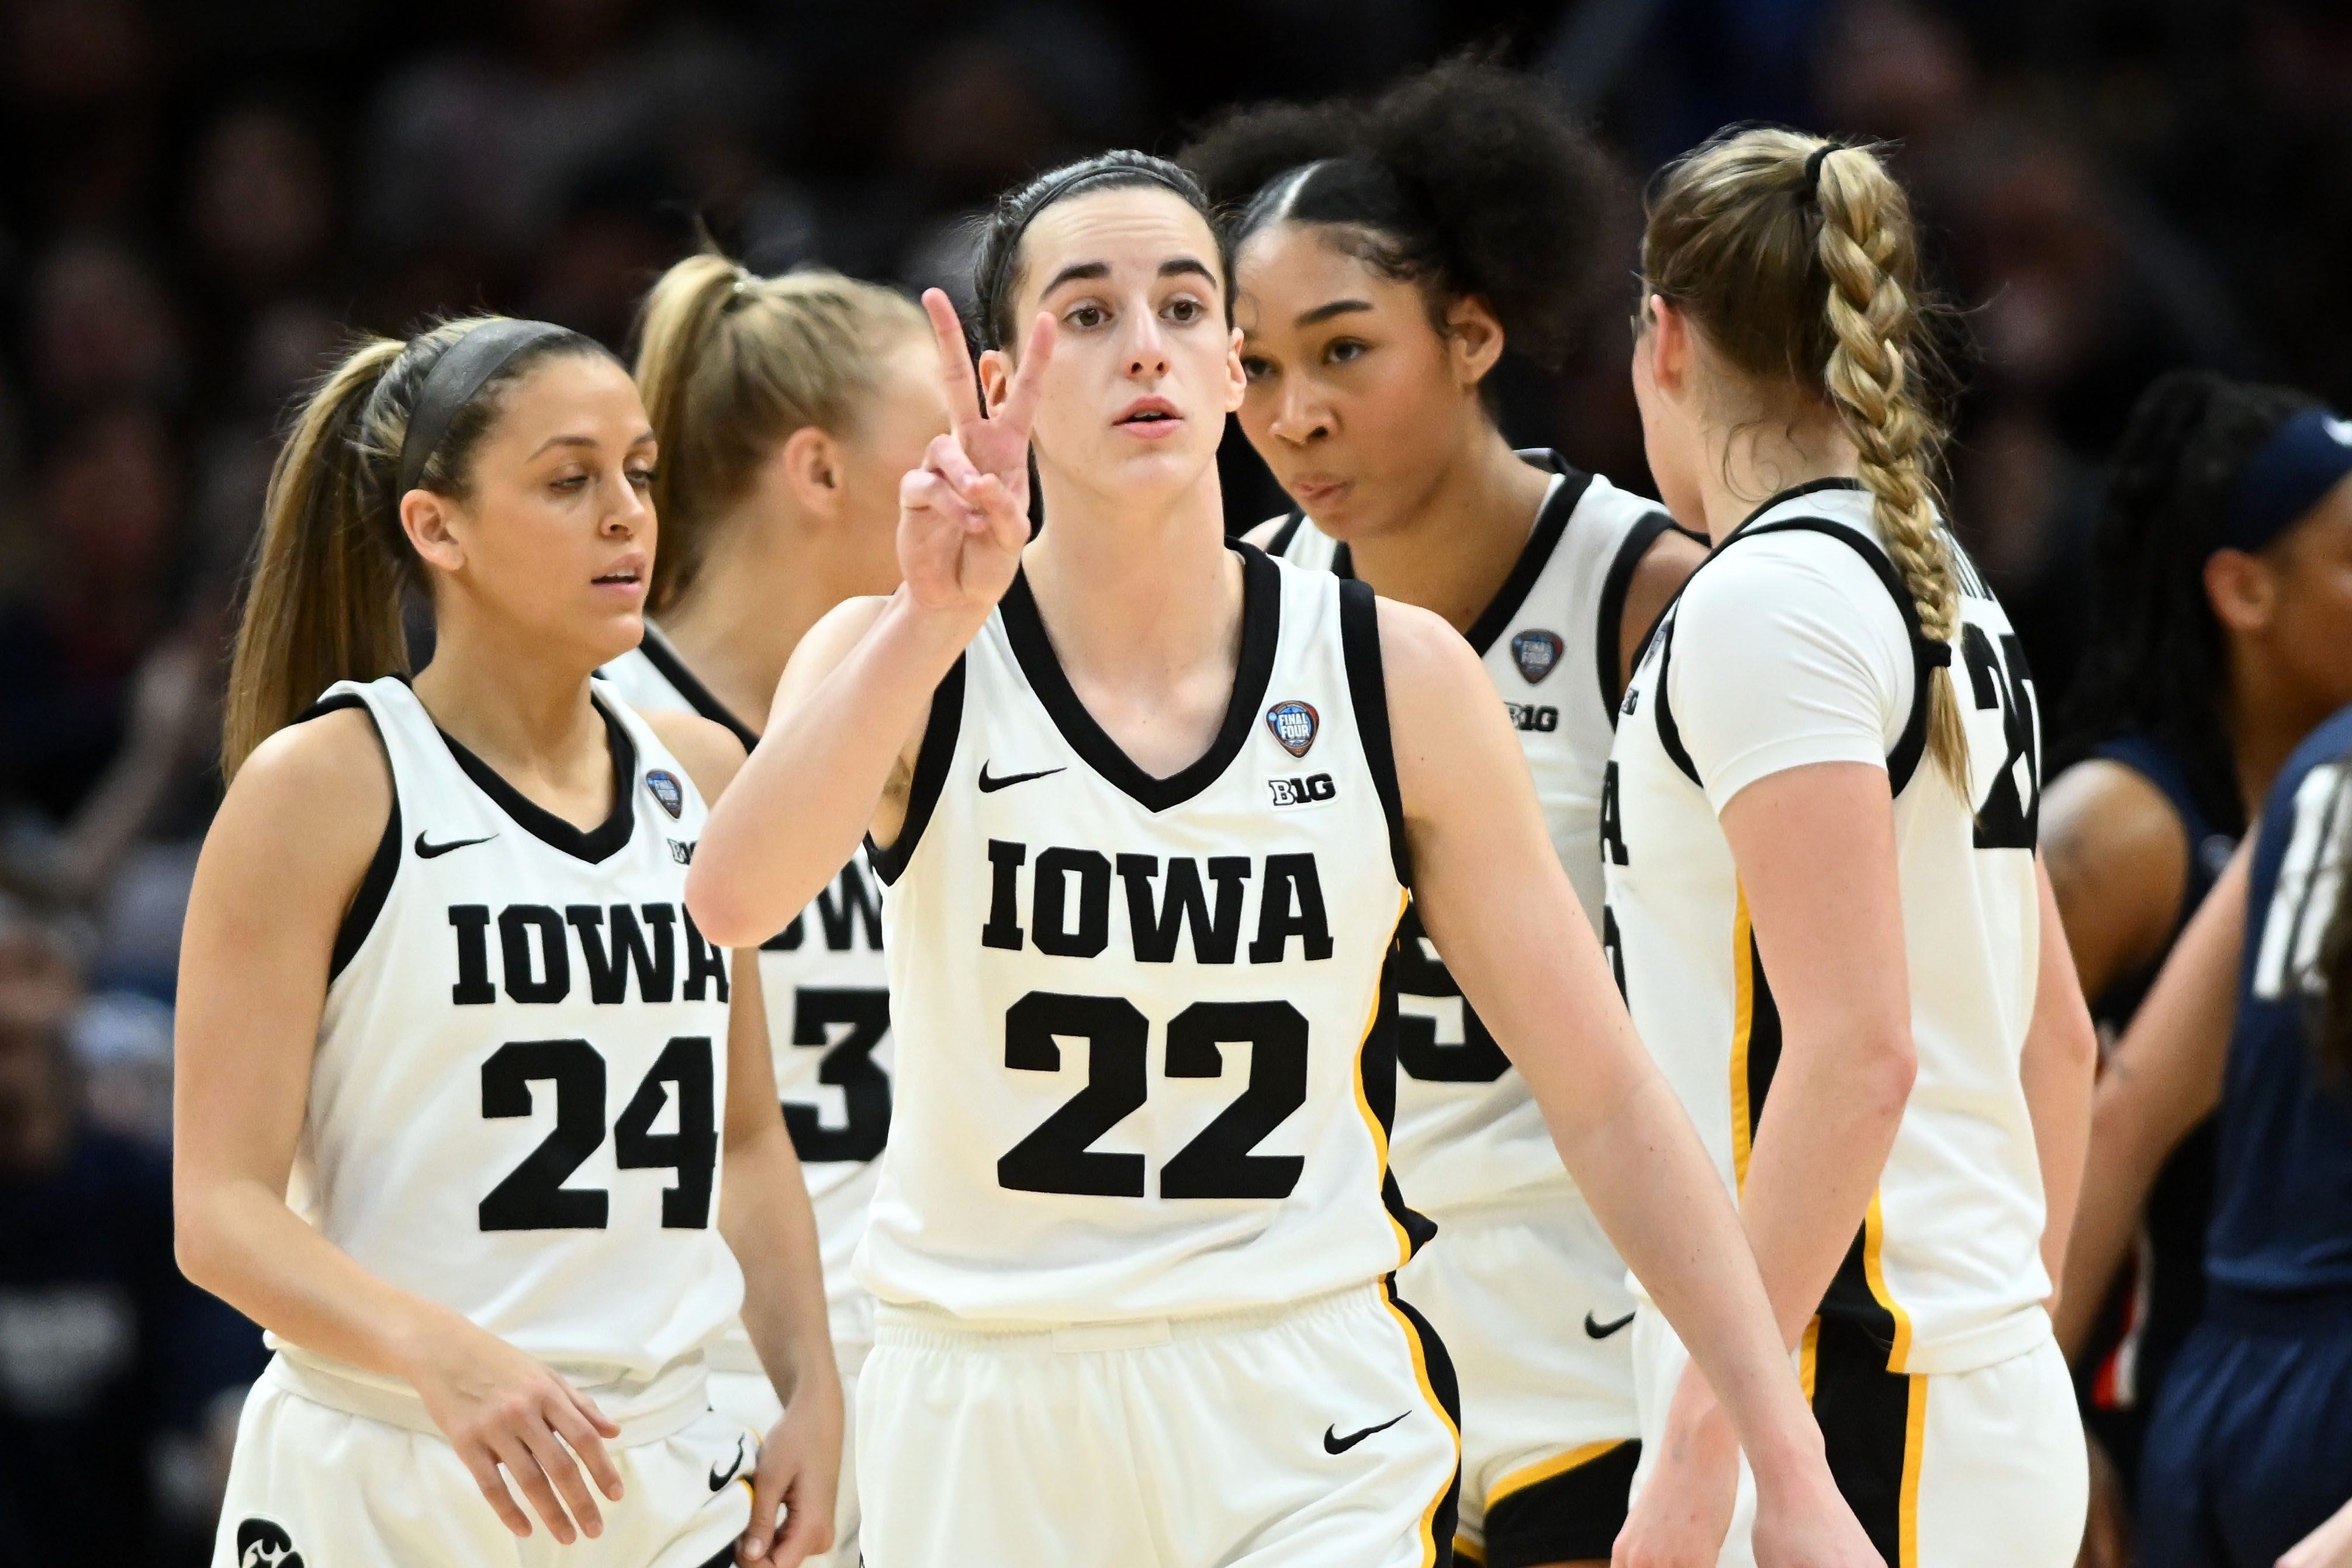 Iowa’s revenue boosted by popularity of women’s sports, ISU sees rise in ticket sales